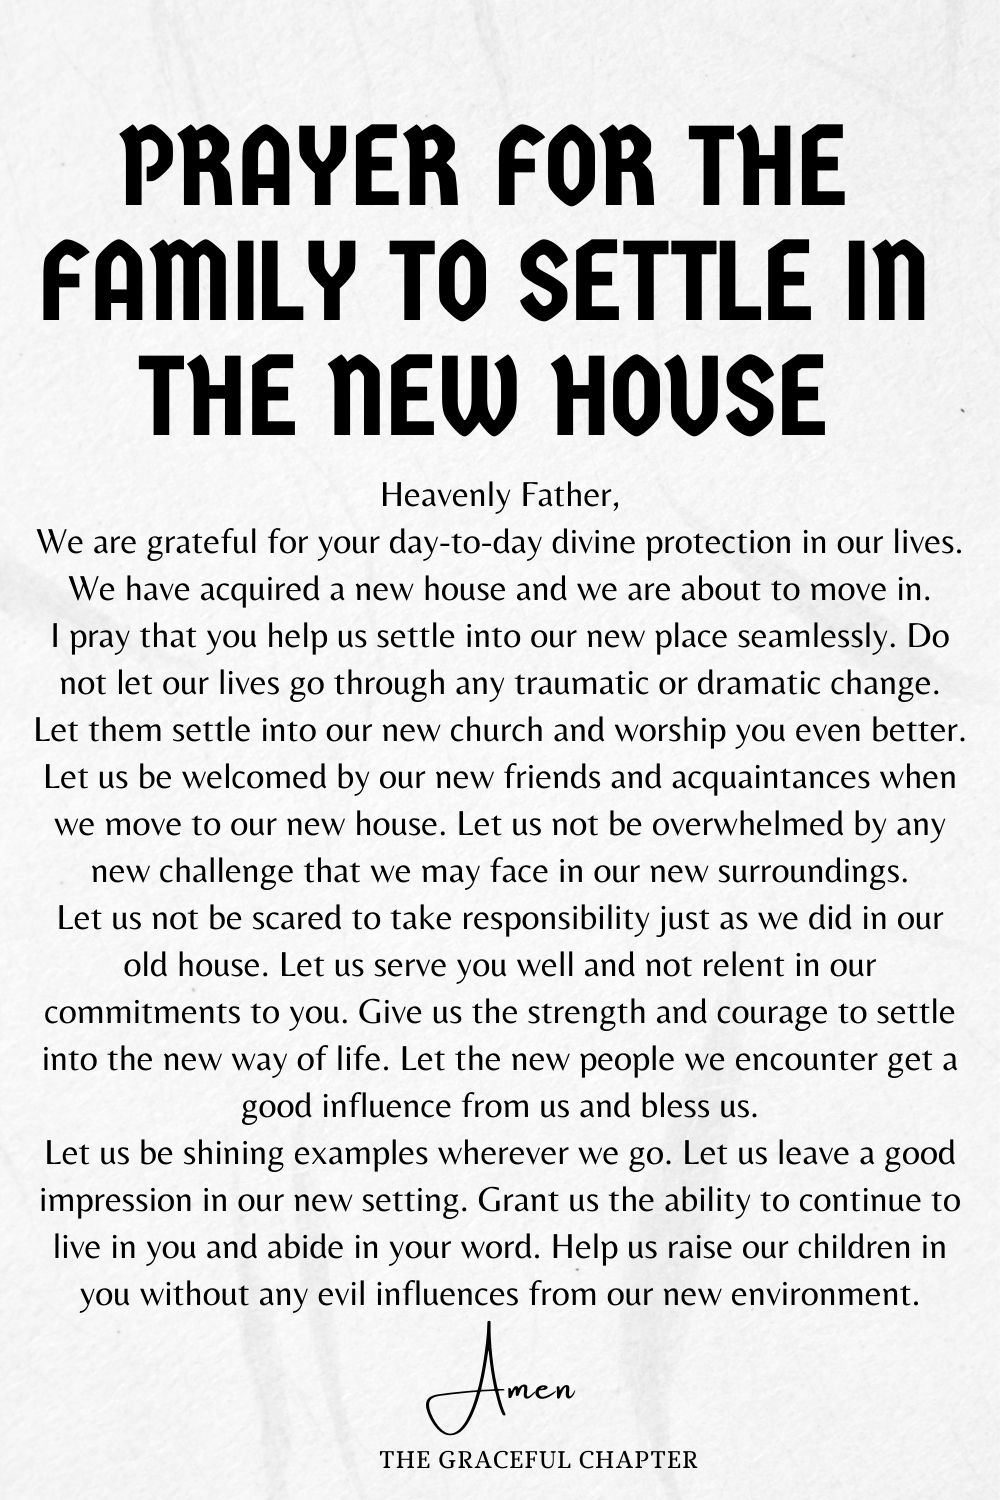 Prayer for the family to settle in the new house